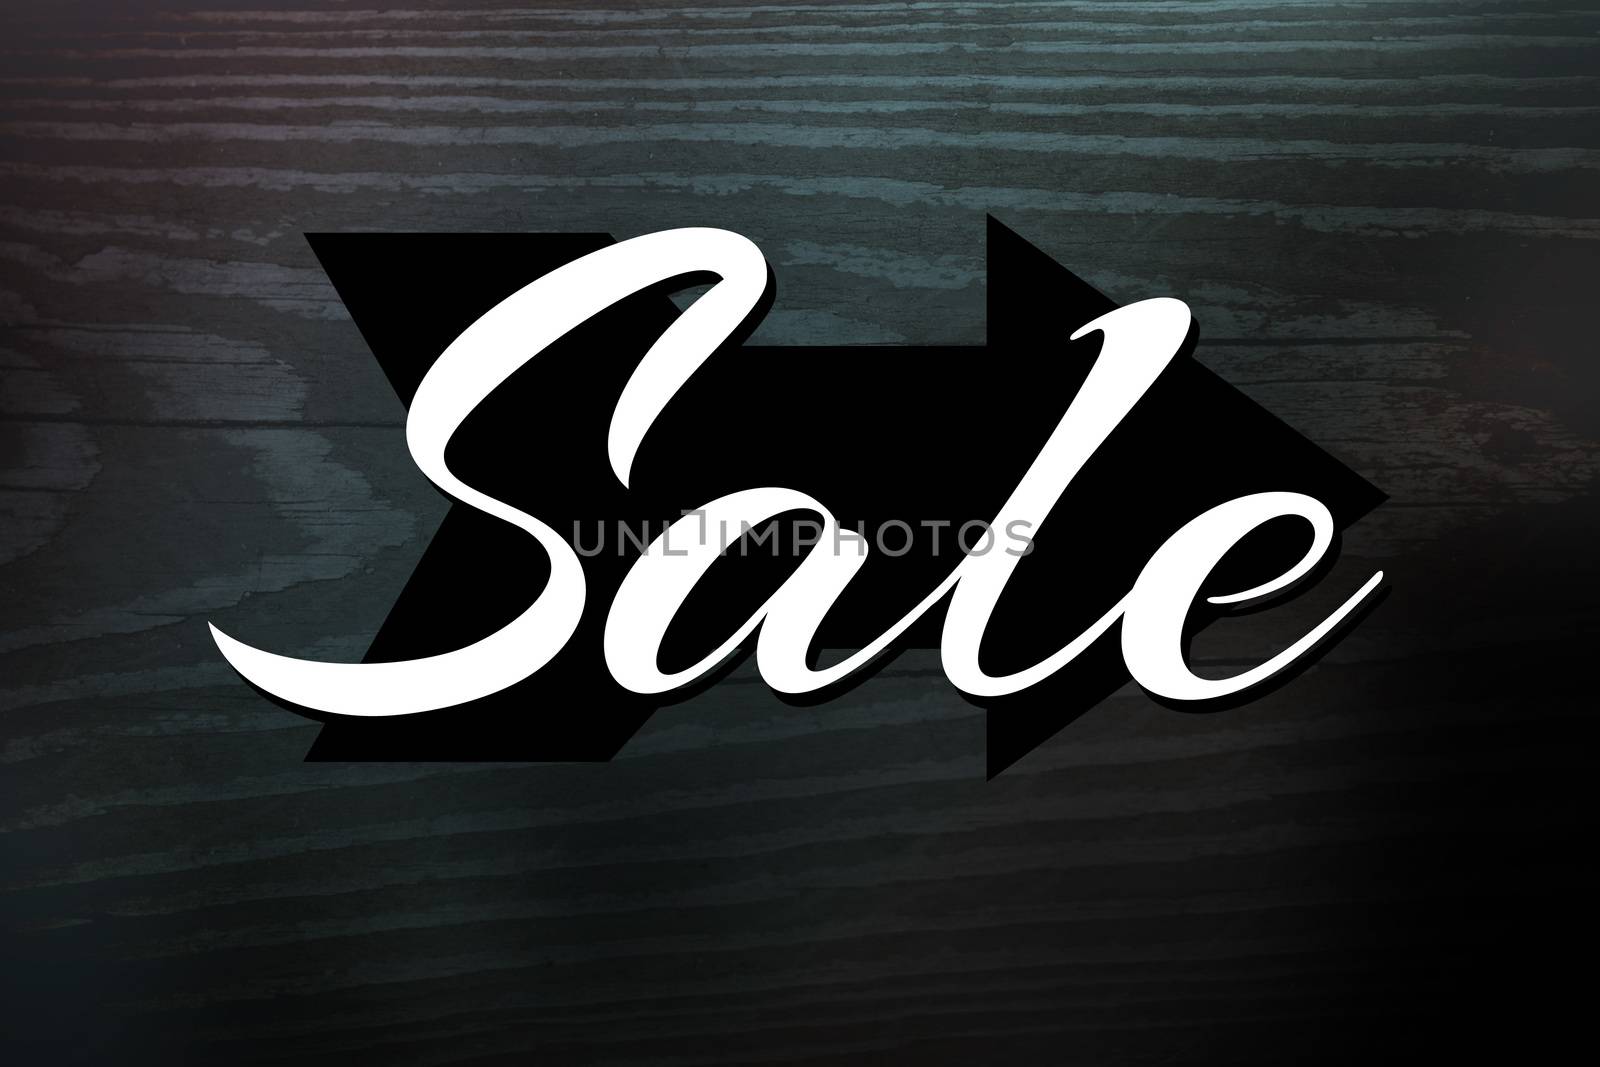 Sale sign design with vintage style typography over a woodgrain background.